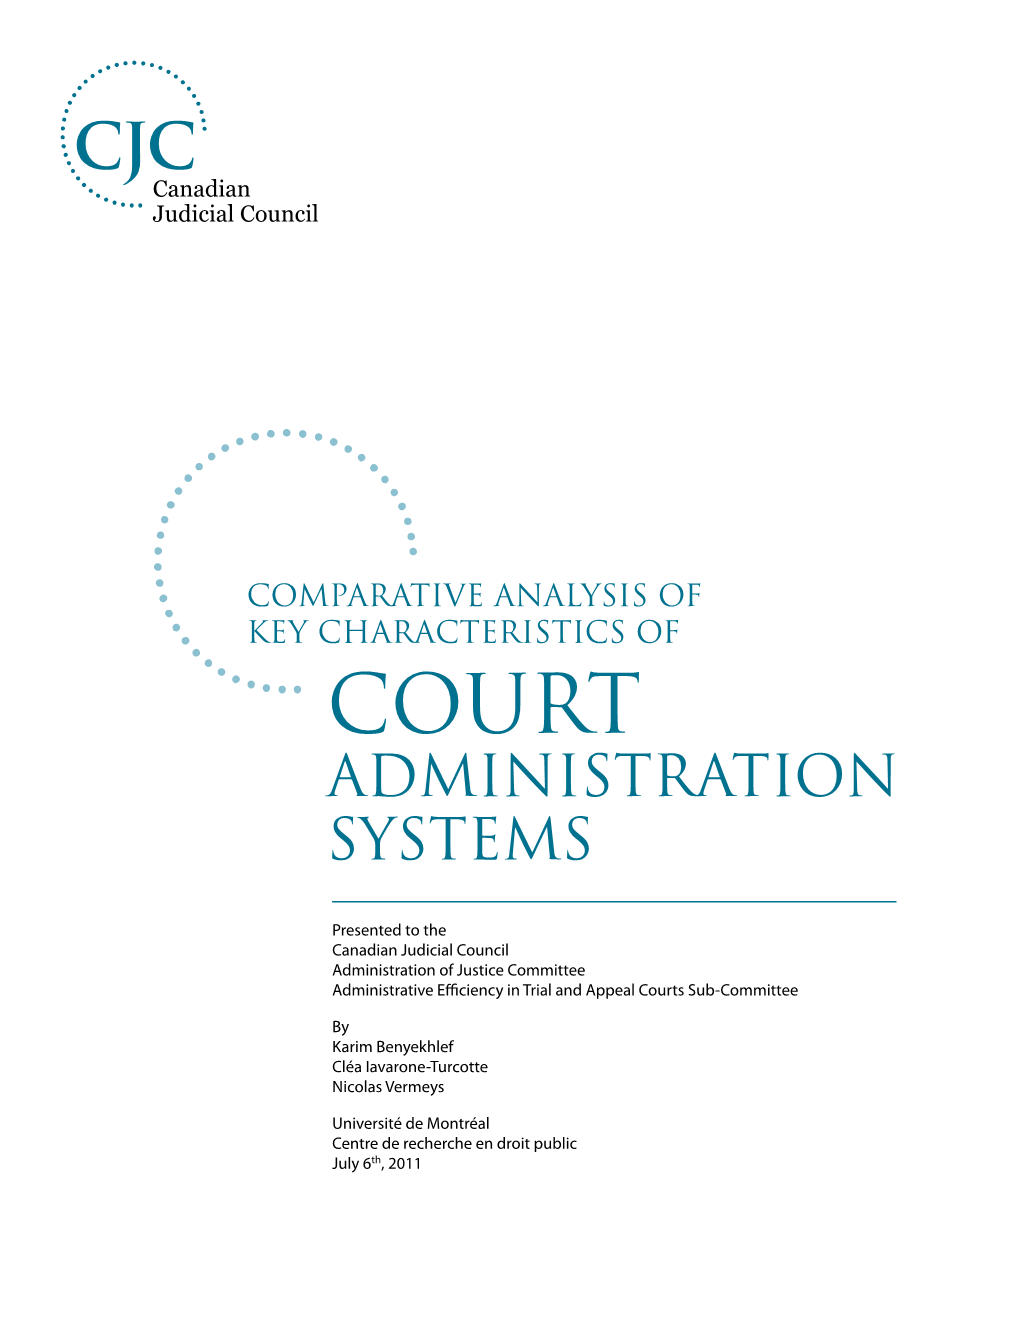 Court Administration Systems